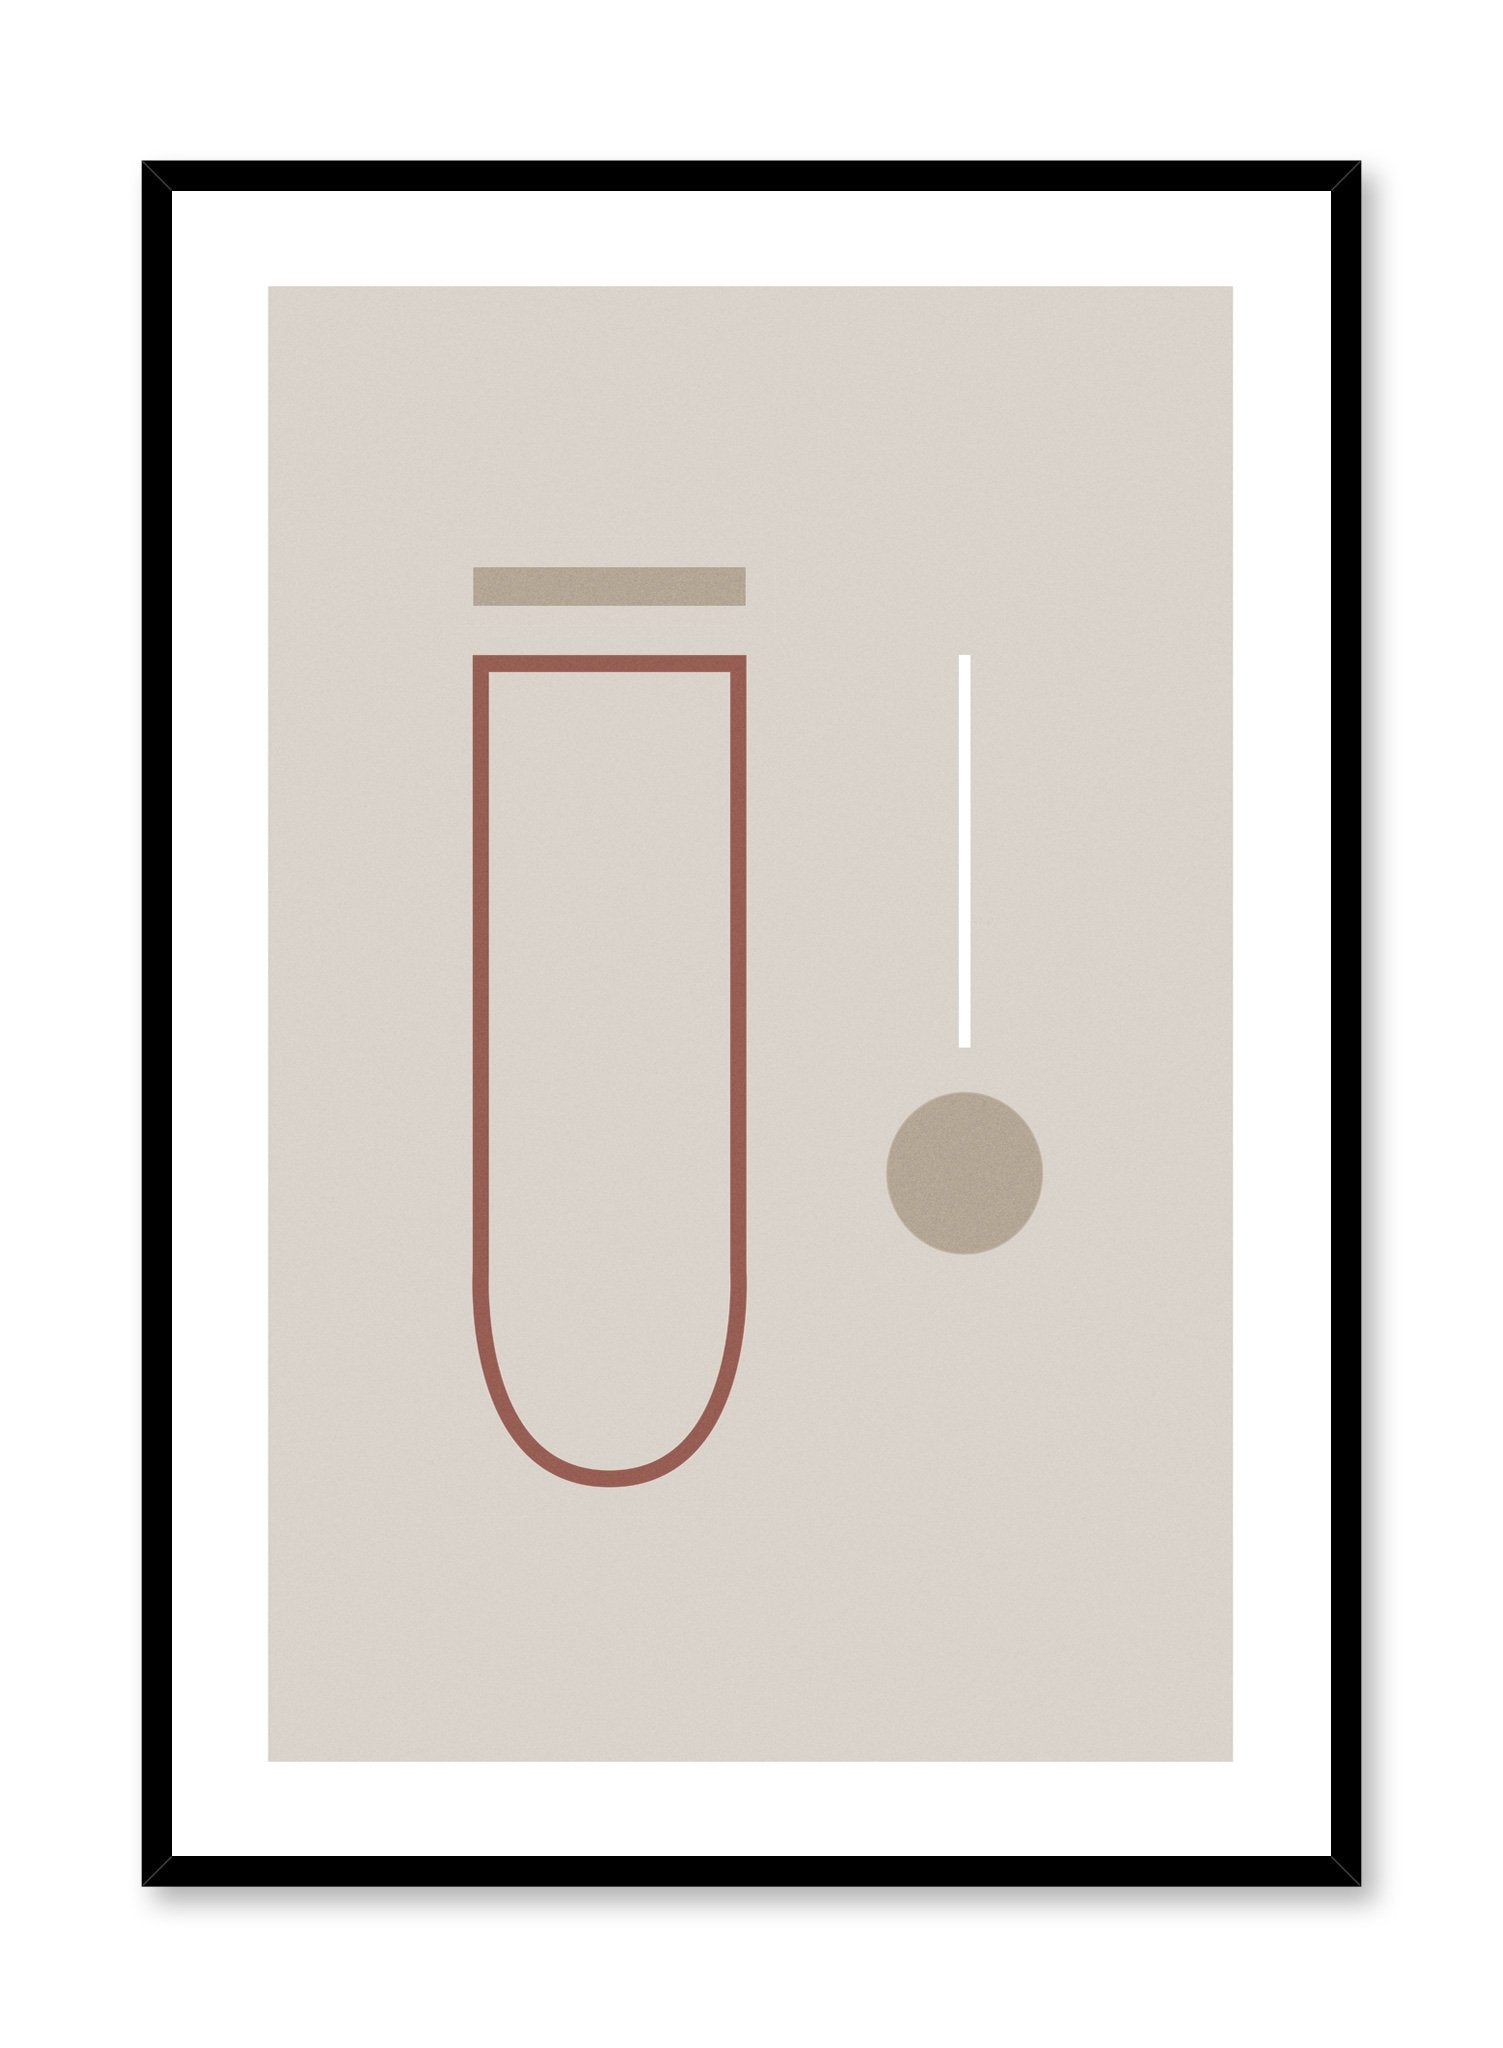 Modern minimalist poster by Opposite Wall with Reminiscent abstract design